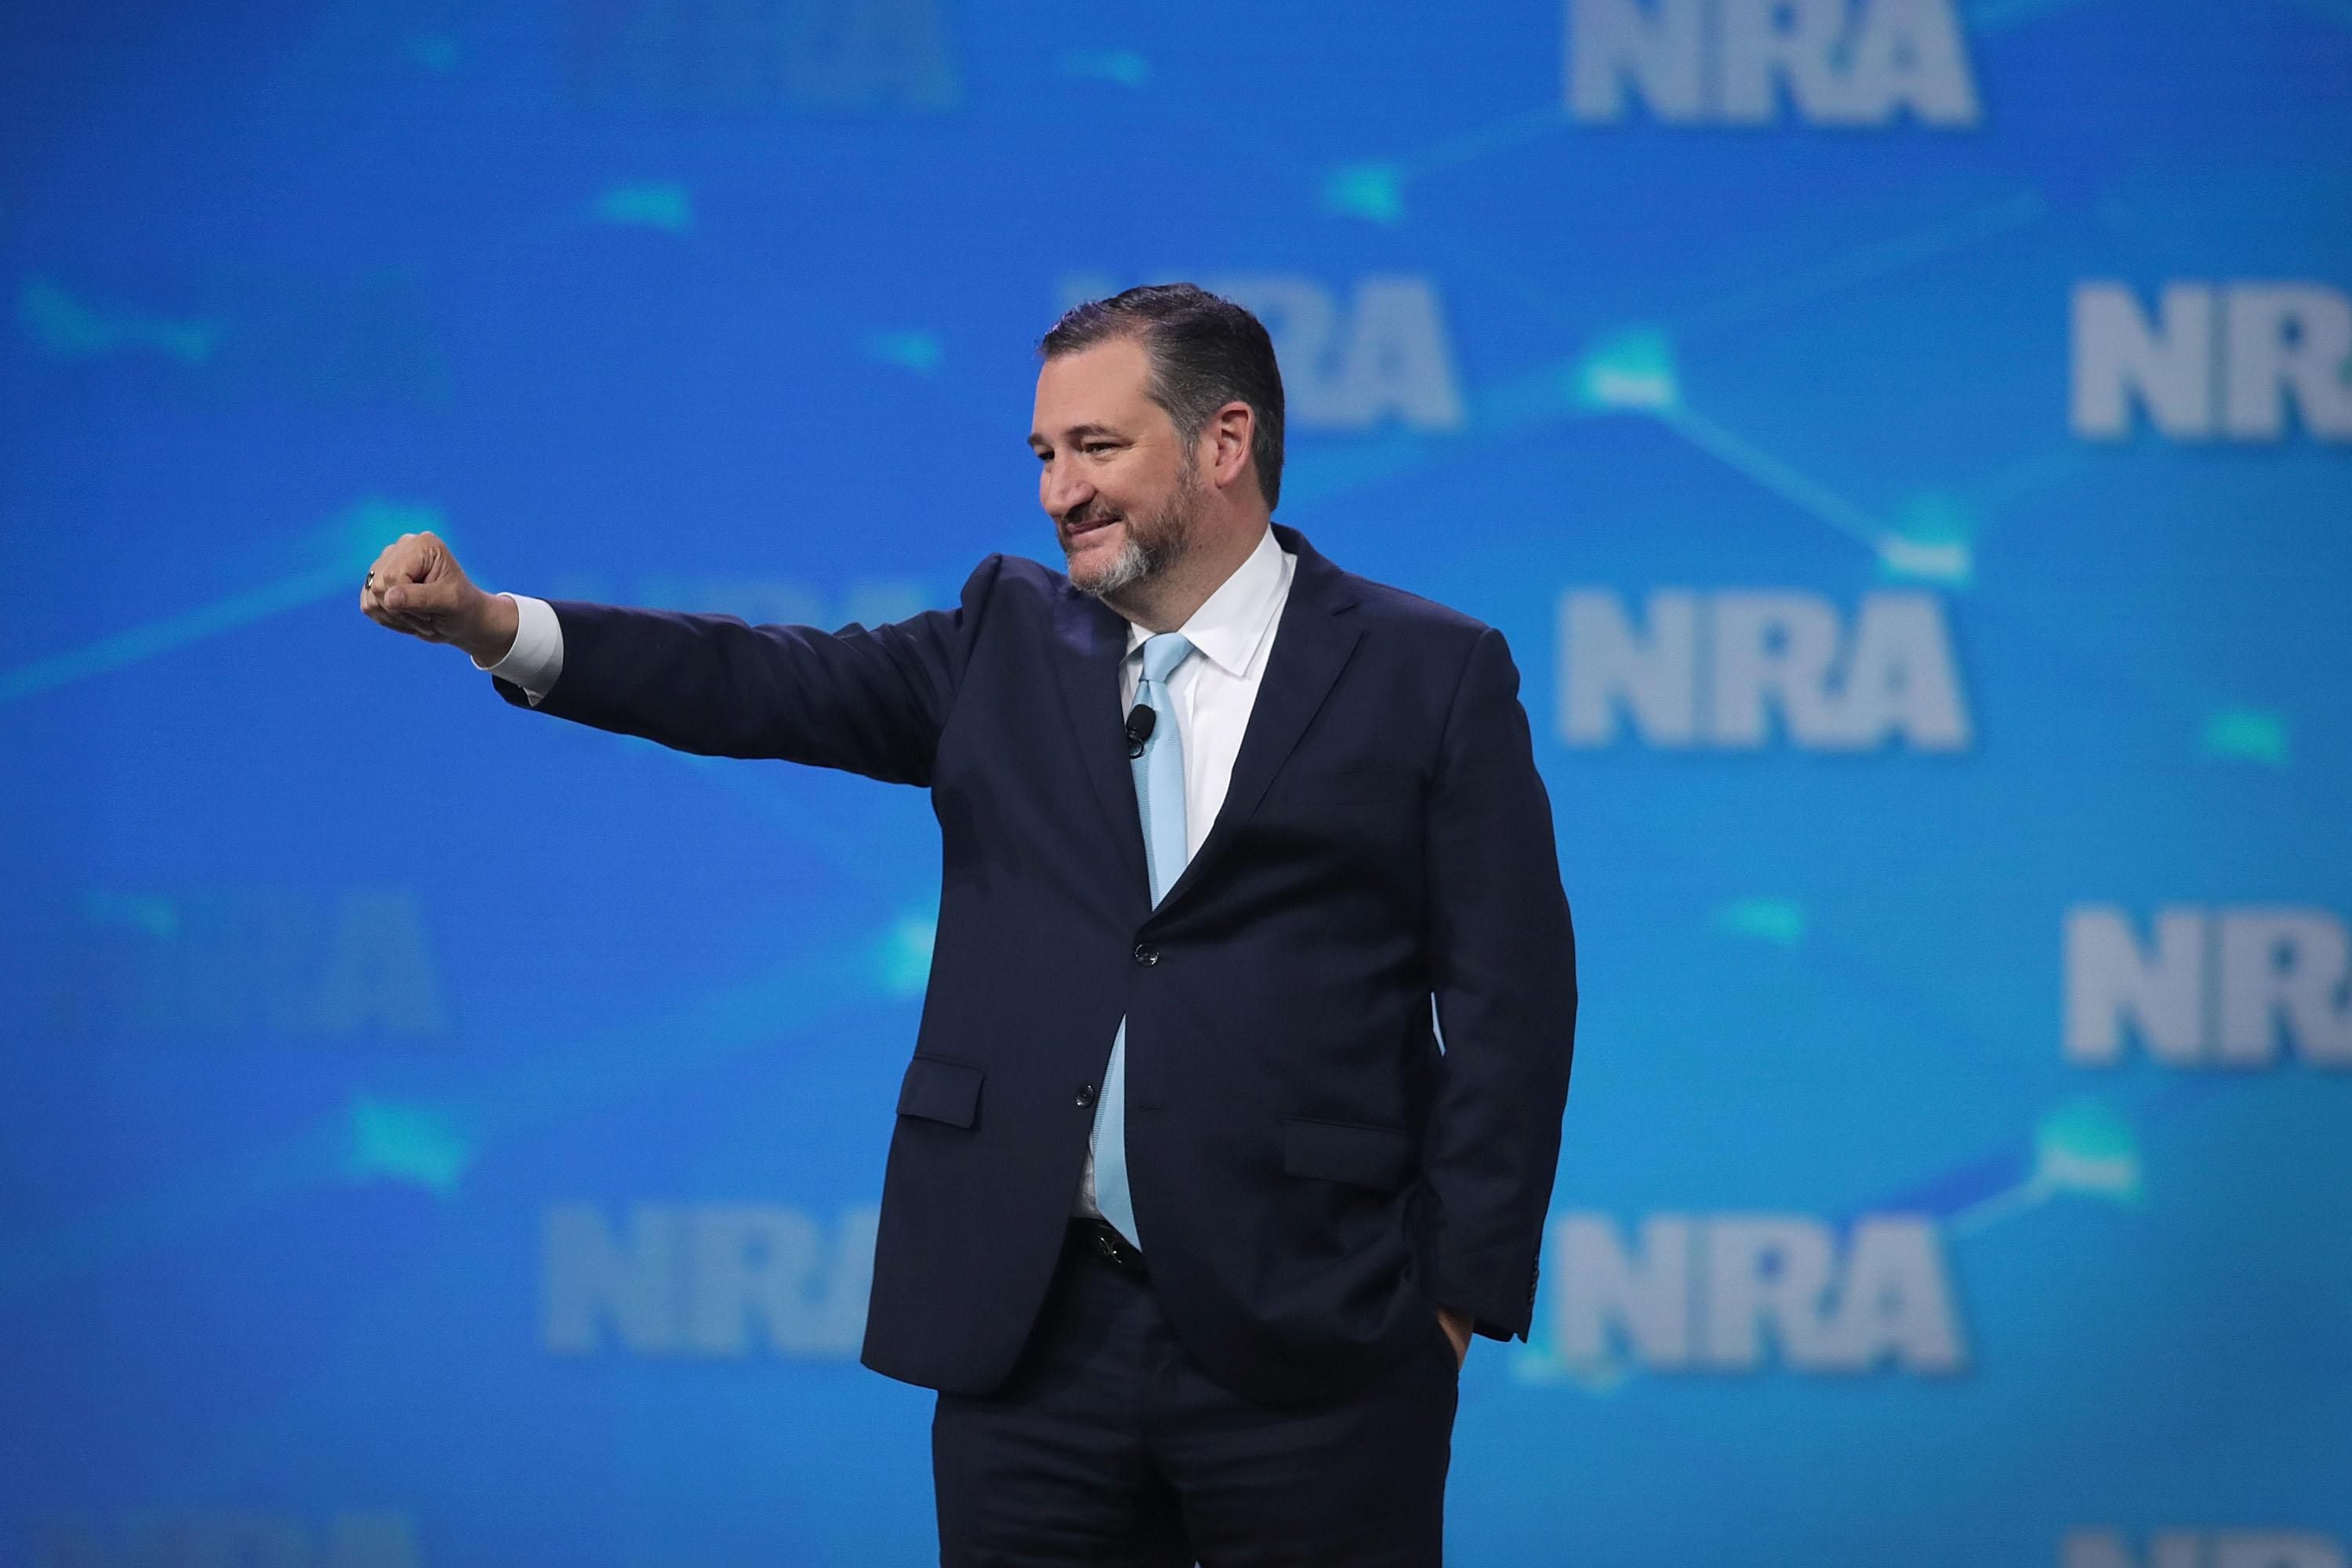 Ted Cruz speaks at NRA conference